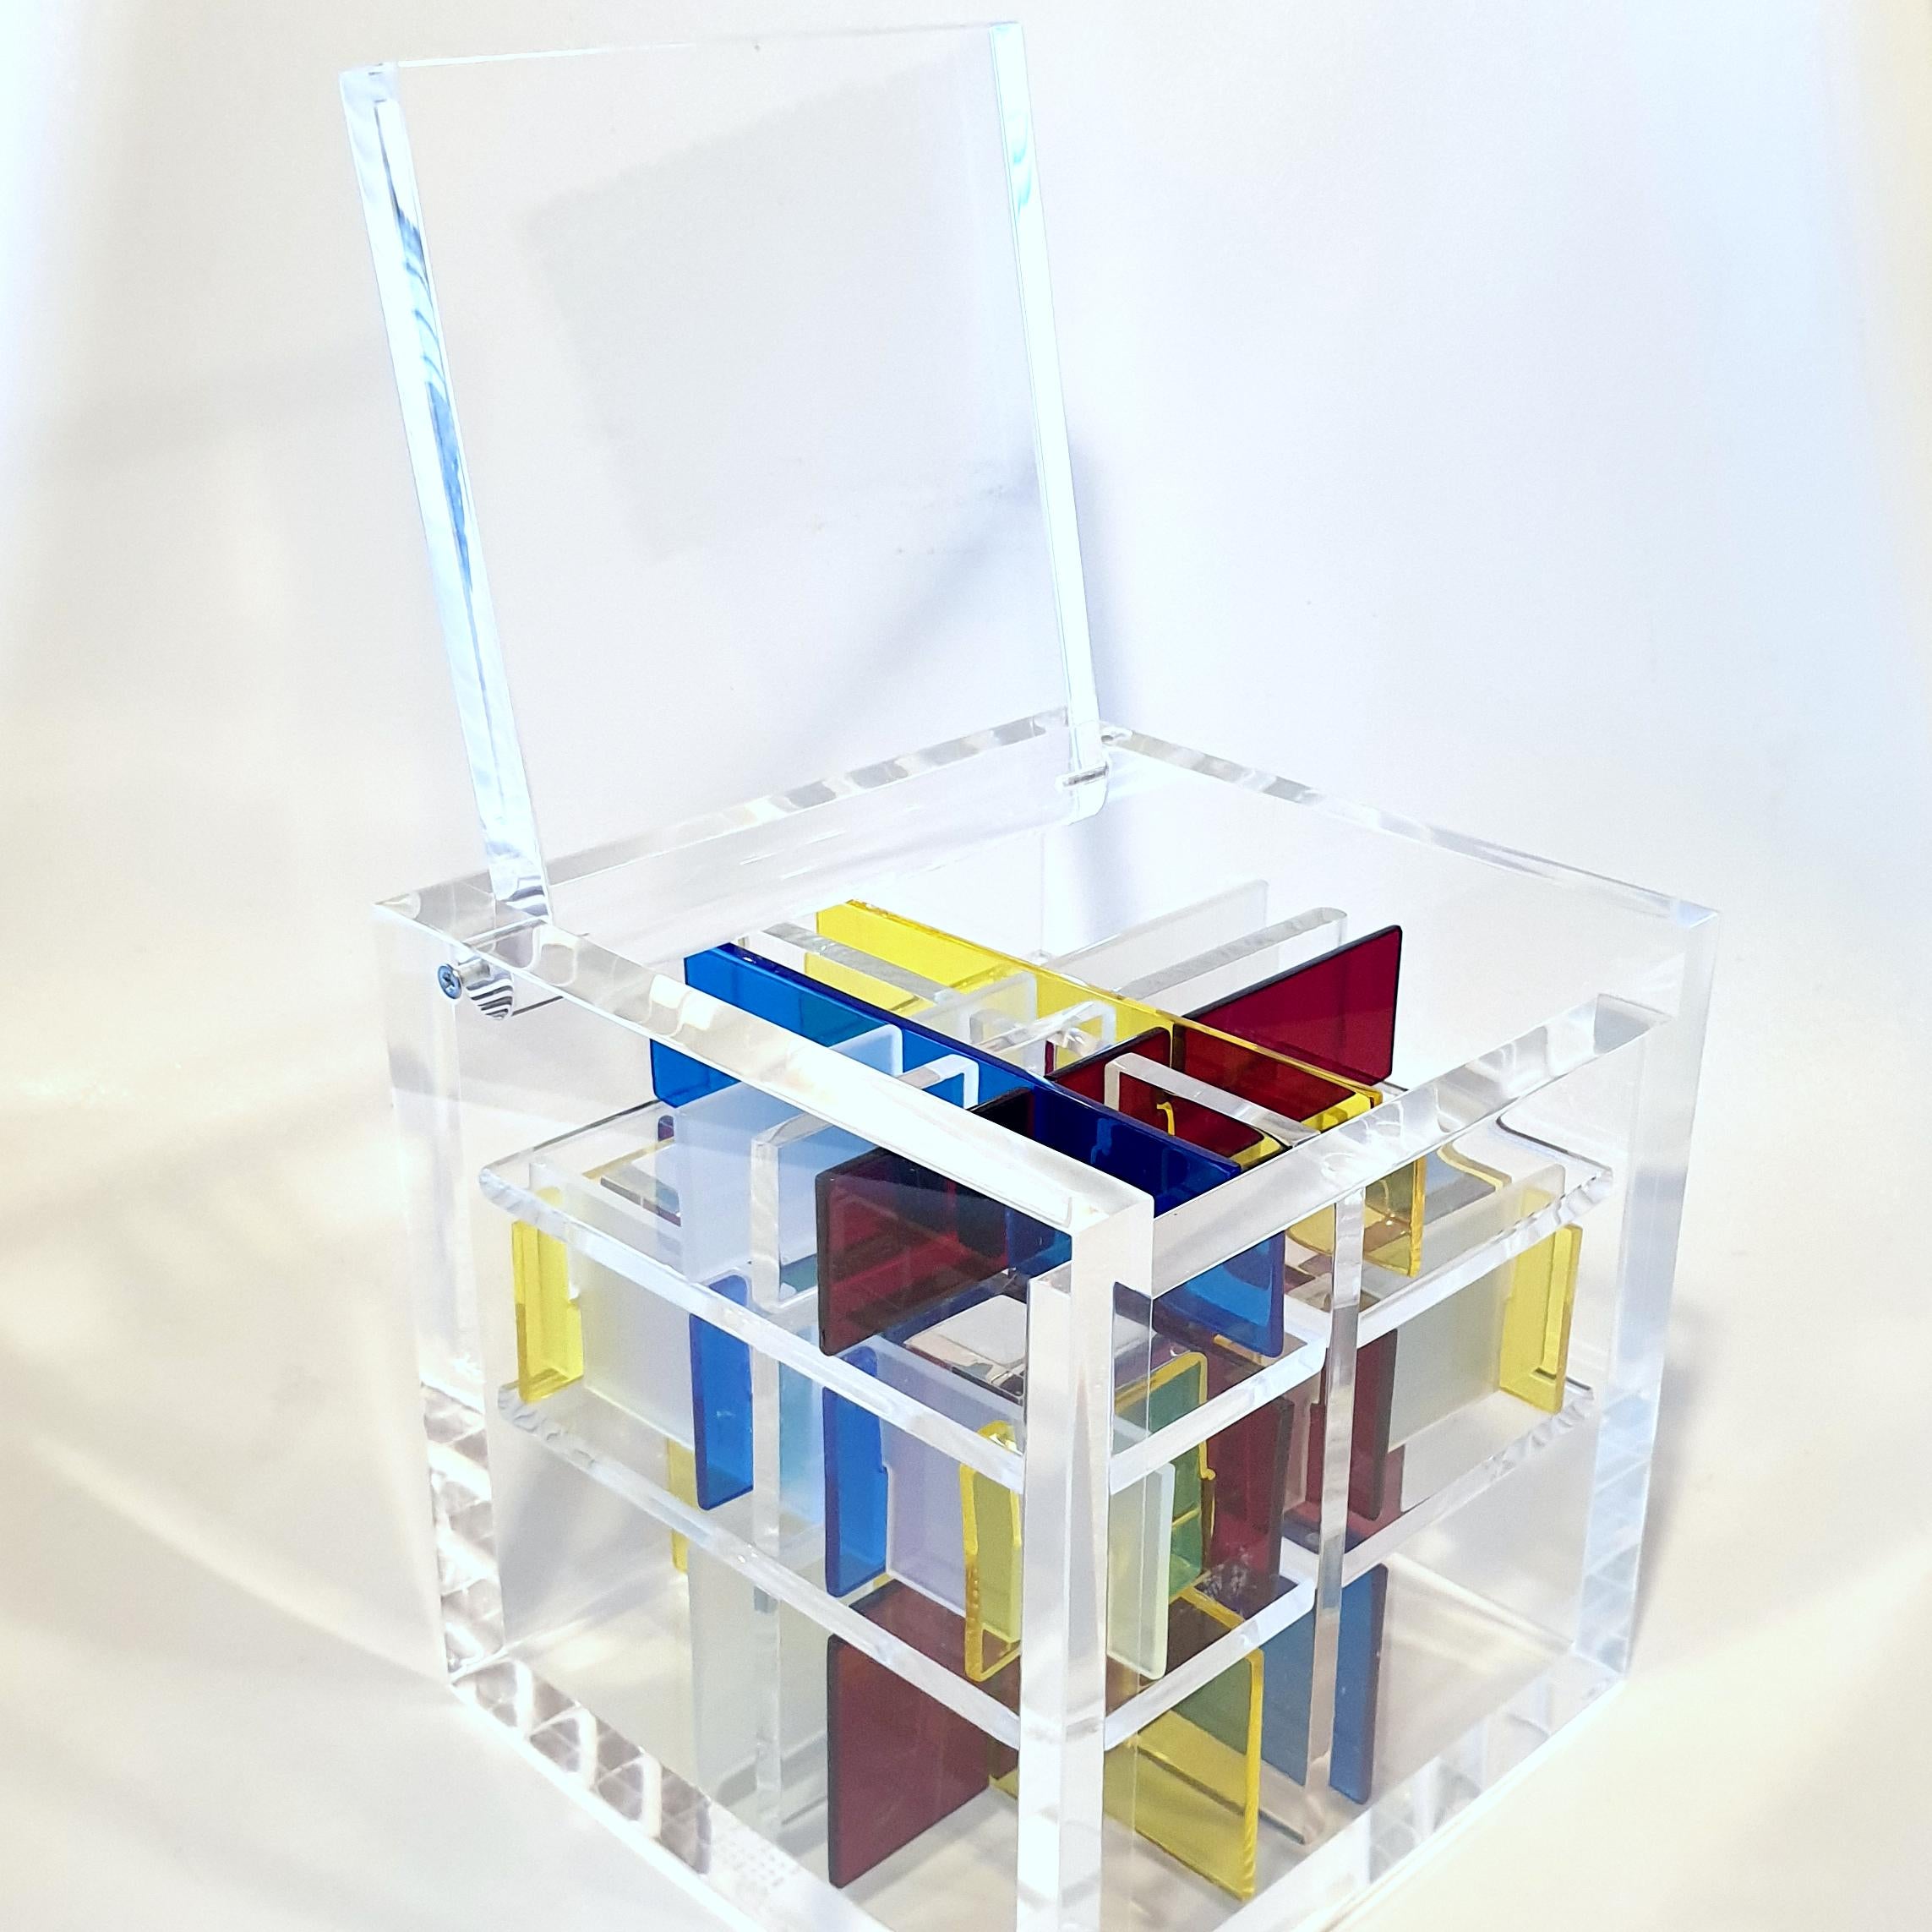 Spatial Construct - contemporary modern abstract geometric cube sculpture - Sculpture by Haringa + Olijve